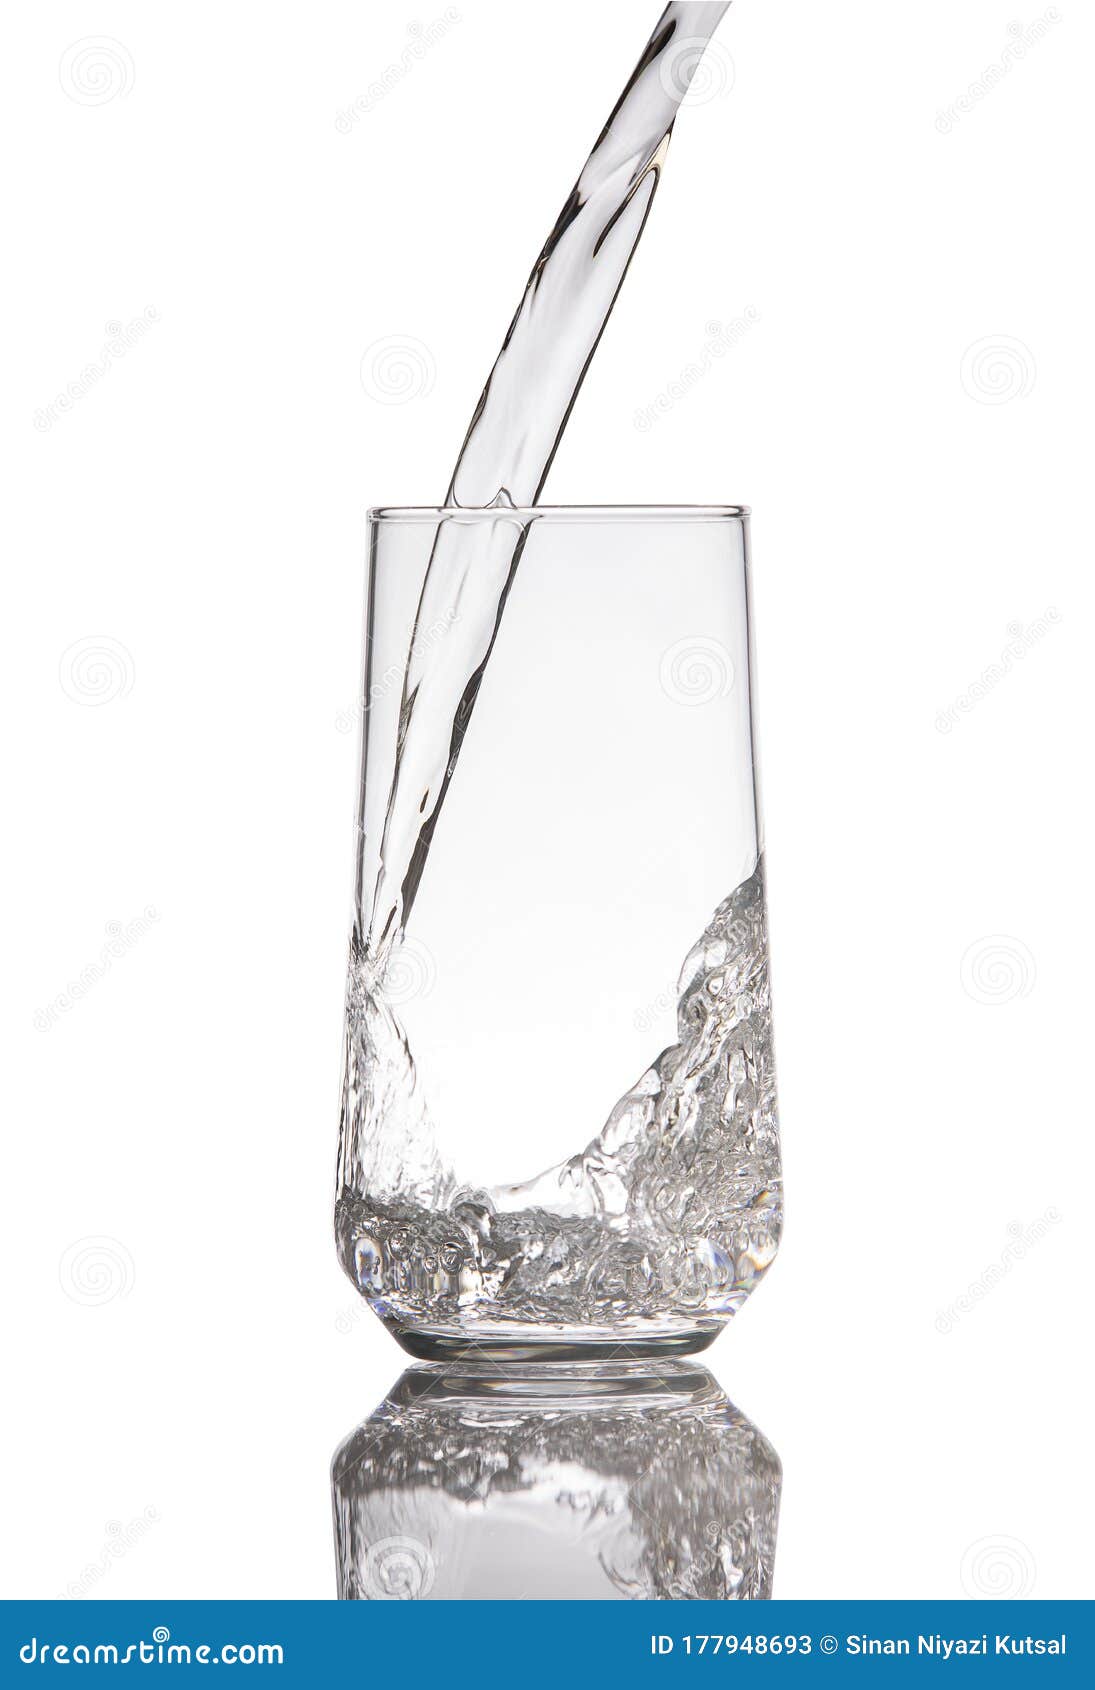 Pouring water in the glass stock image. Image of beauty - 177948693